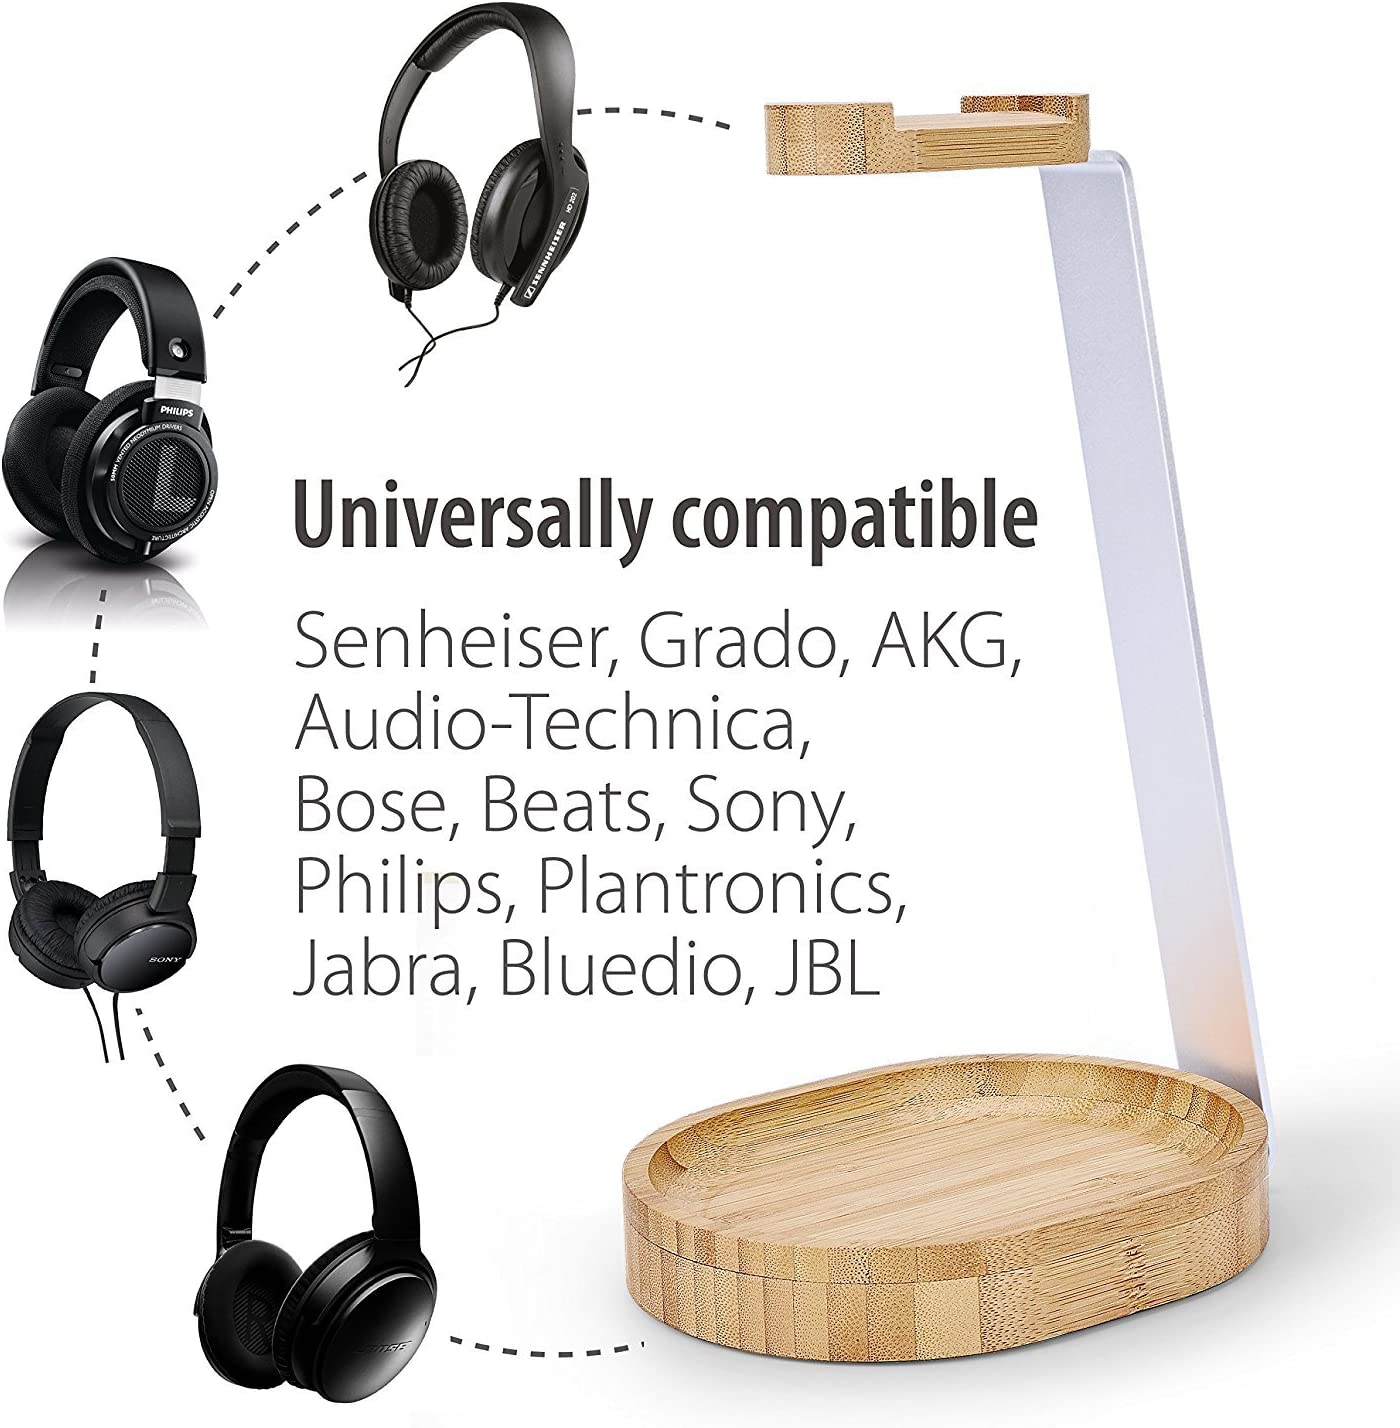 A wooden and alloy headphone stand. There are also 4 various brands of headphones nearby with text that says, 'Universally compatible.' There is also a list of brand names for which the headphone stand is compatible with.